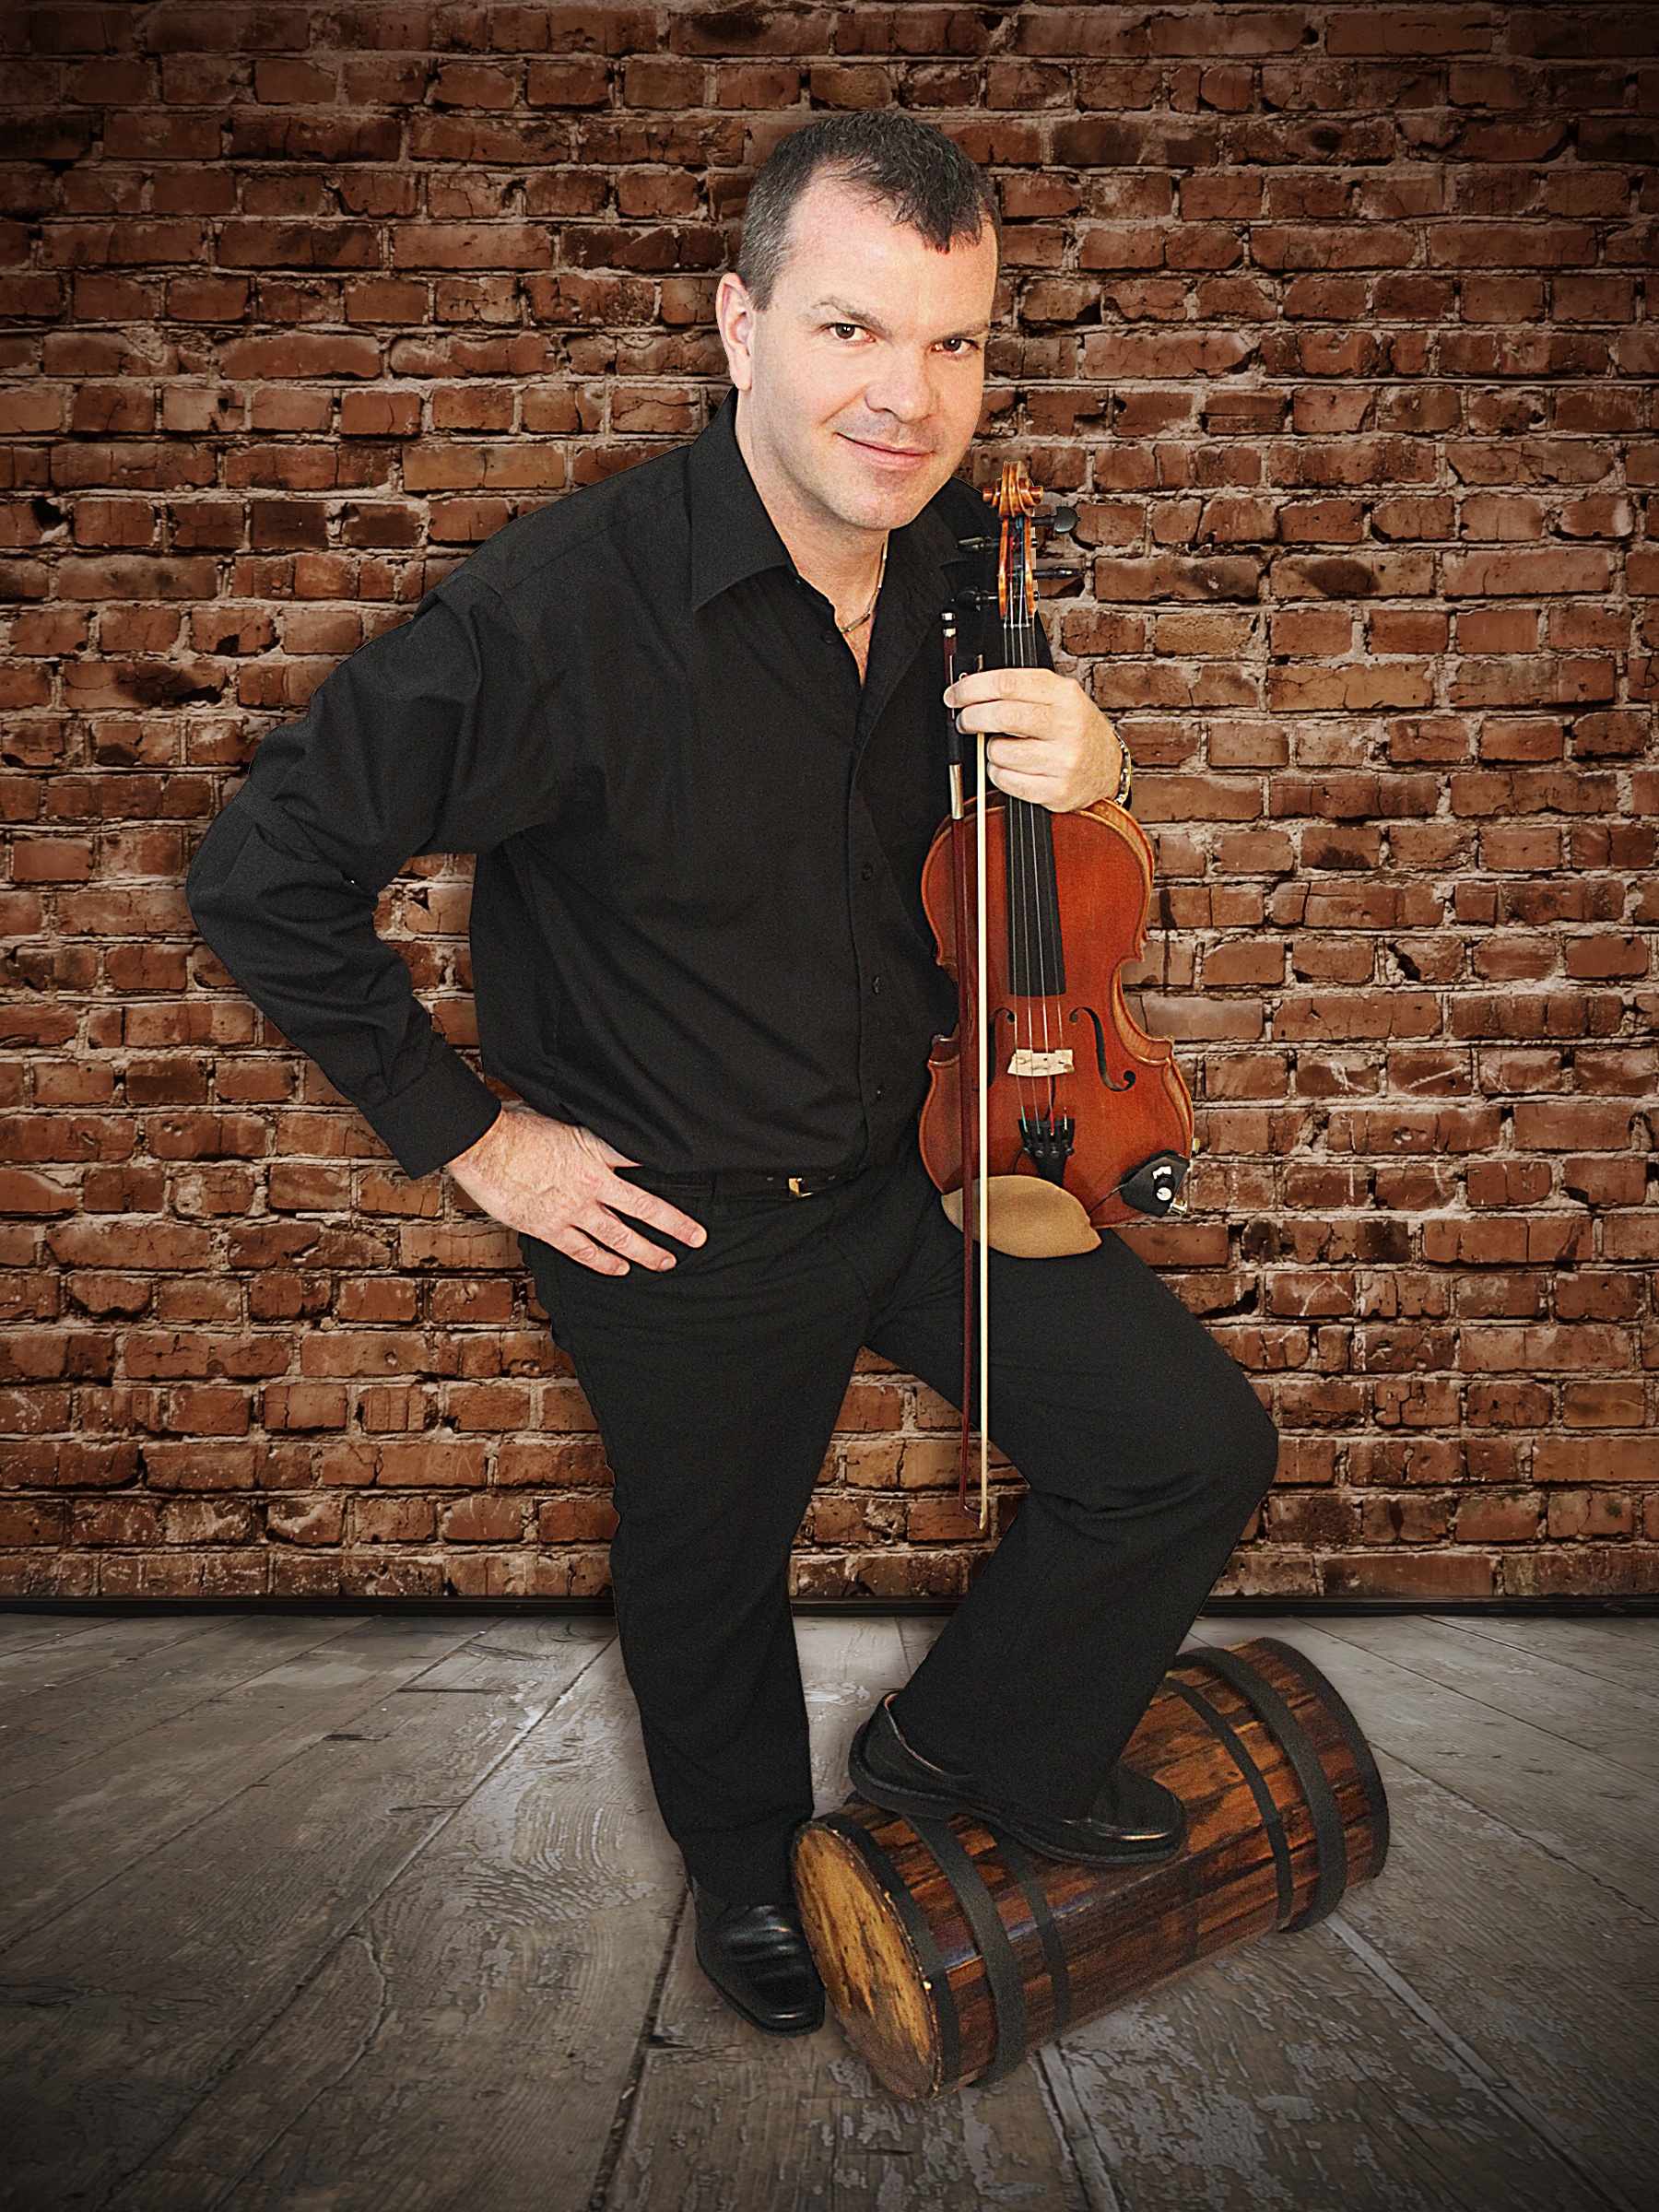 CLASSIC TUNES - Canadian fiddle champion Scott Woods will be performing at Sunnybrook United Church on May 26th as part of his Love That Fiddle tour.